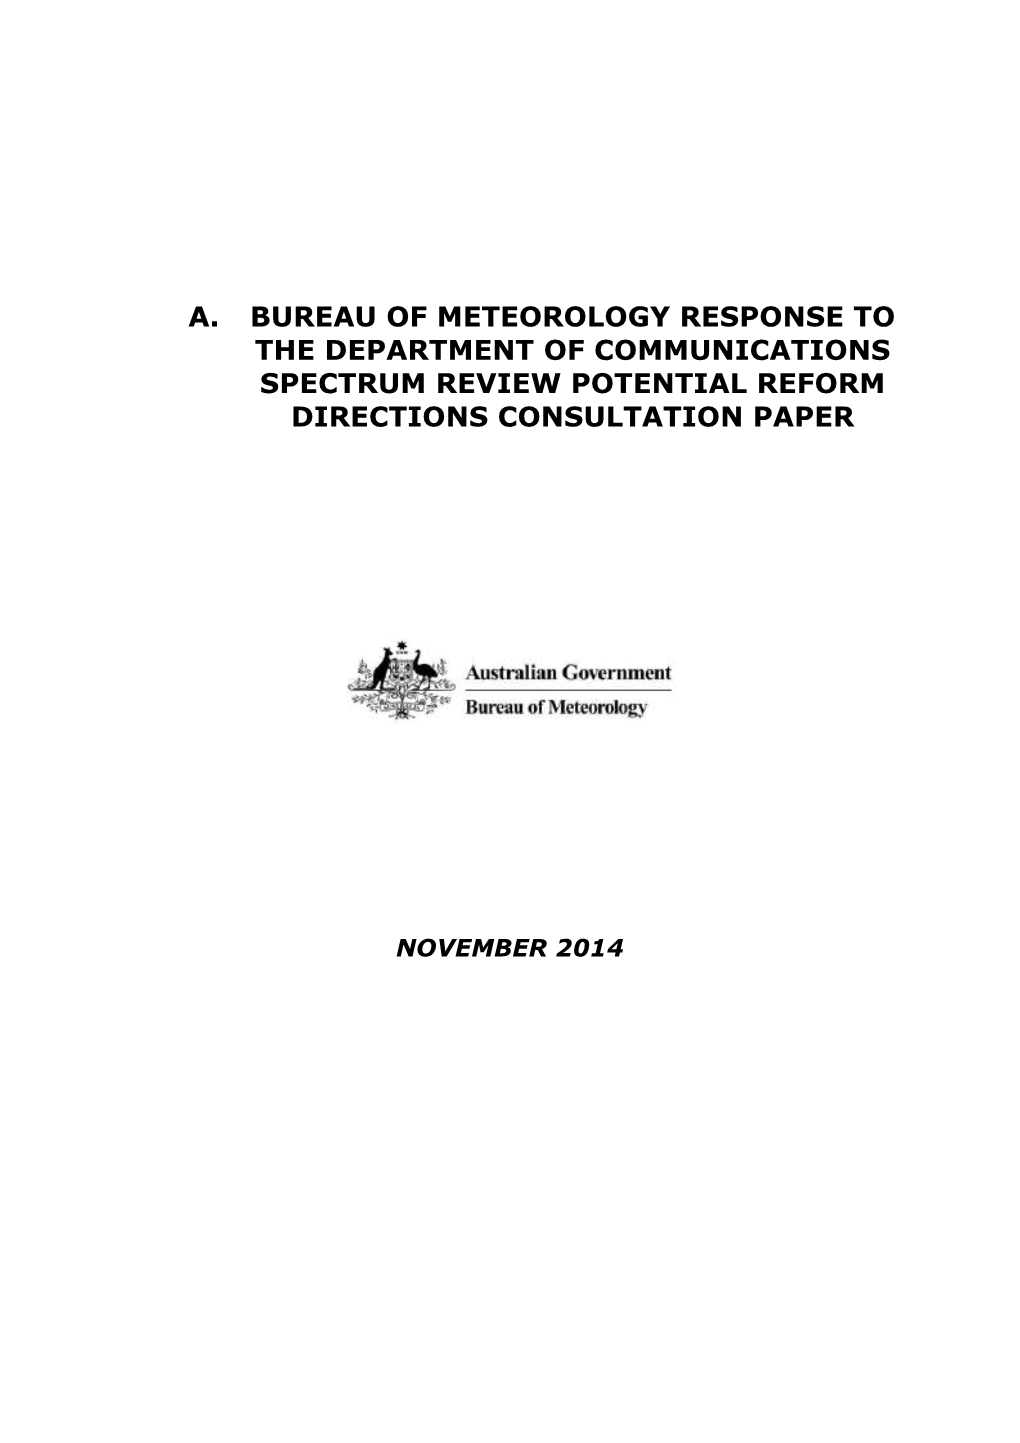 Bureau of Meteorology Response to the Department of Communications Spectrum Review Potential